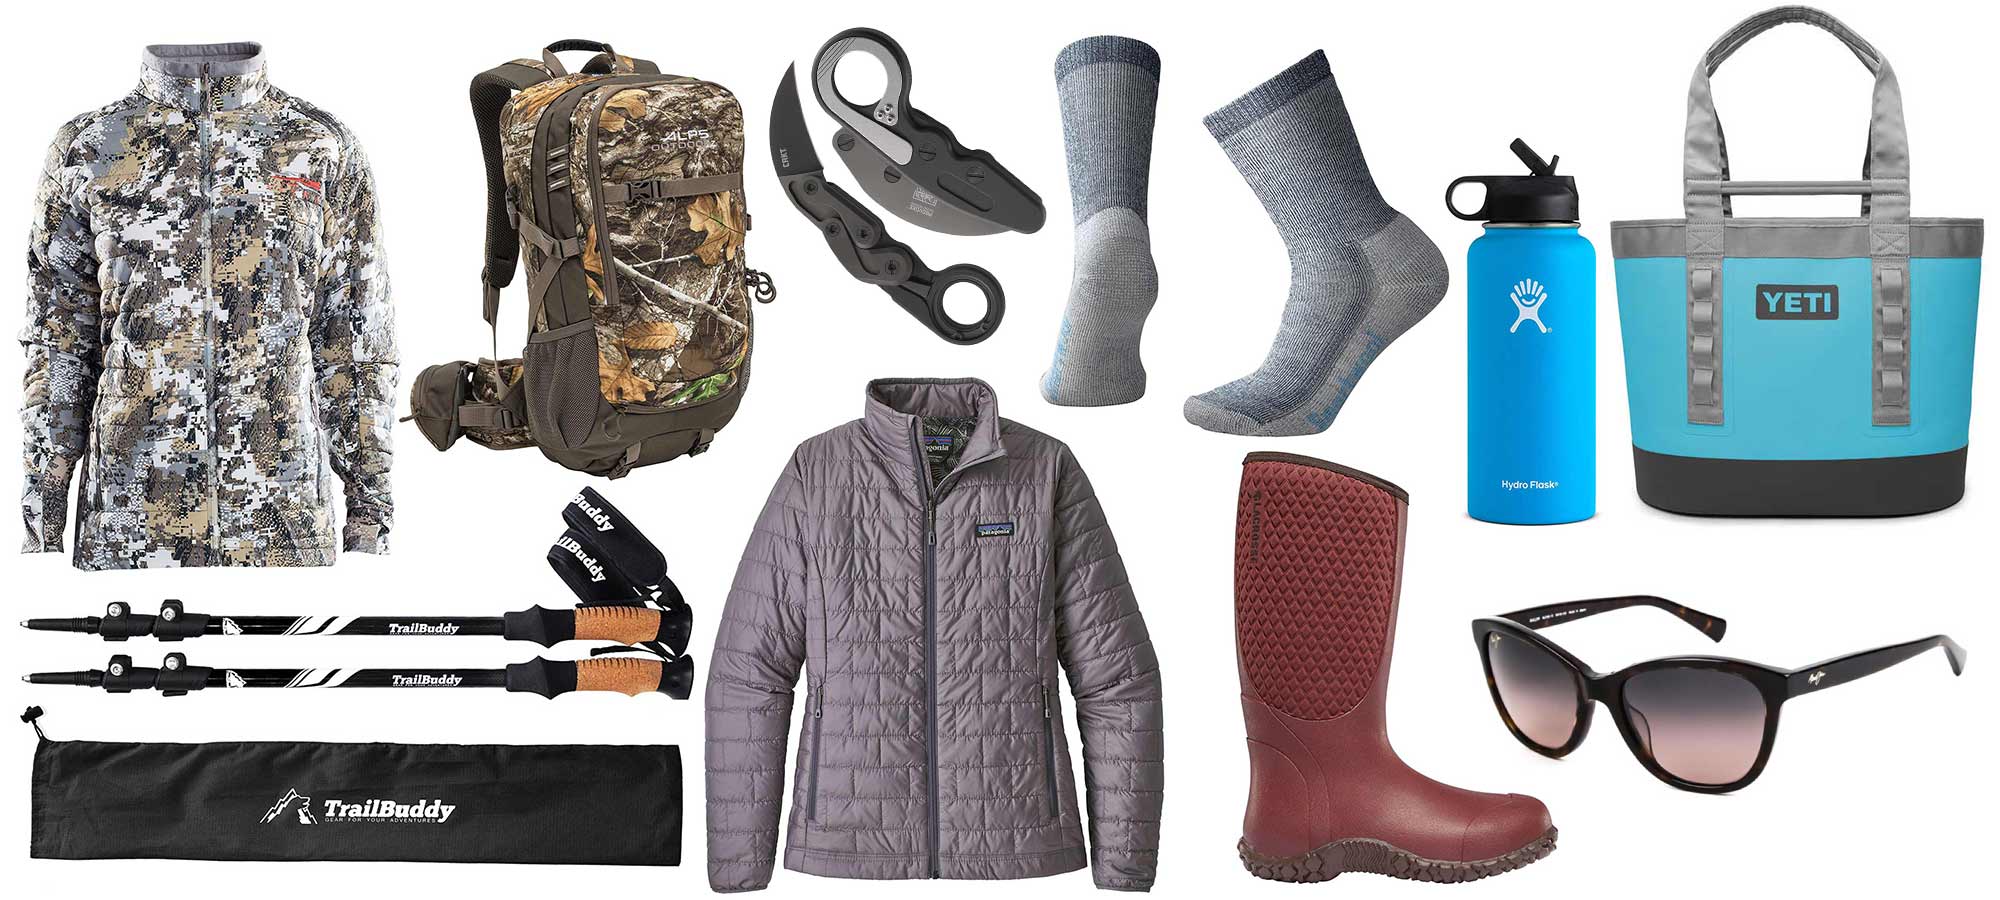 The 2019 Outdoor Life Mother’s Day Gift Guide